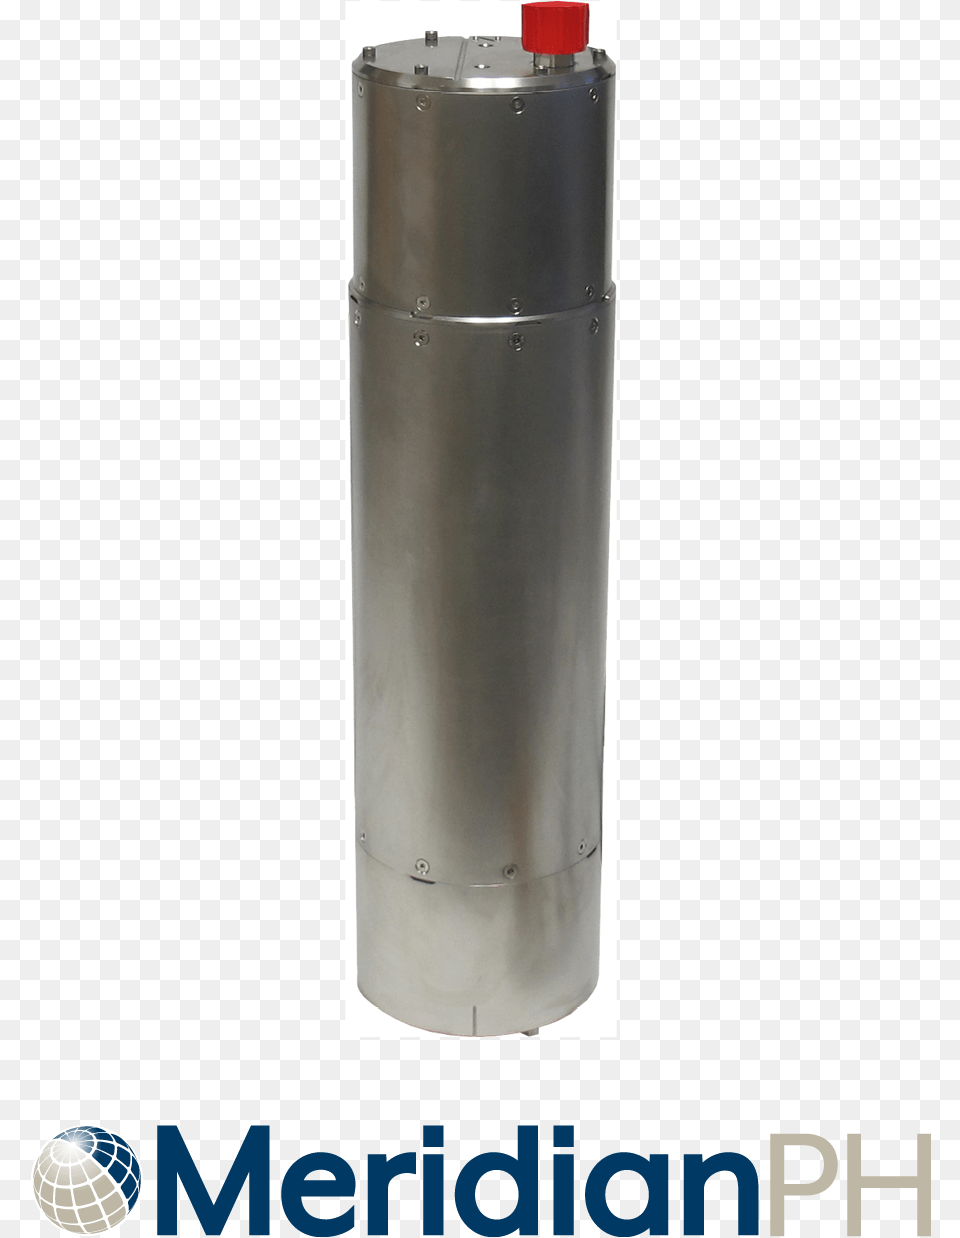 Meridian Ph Plastic, Cylinder, Mortar Shell, Weapon, Barrel Png